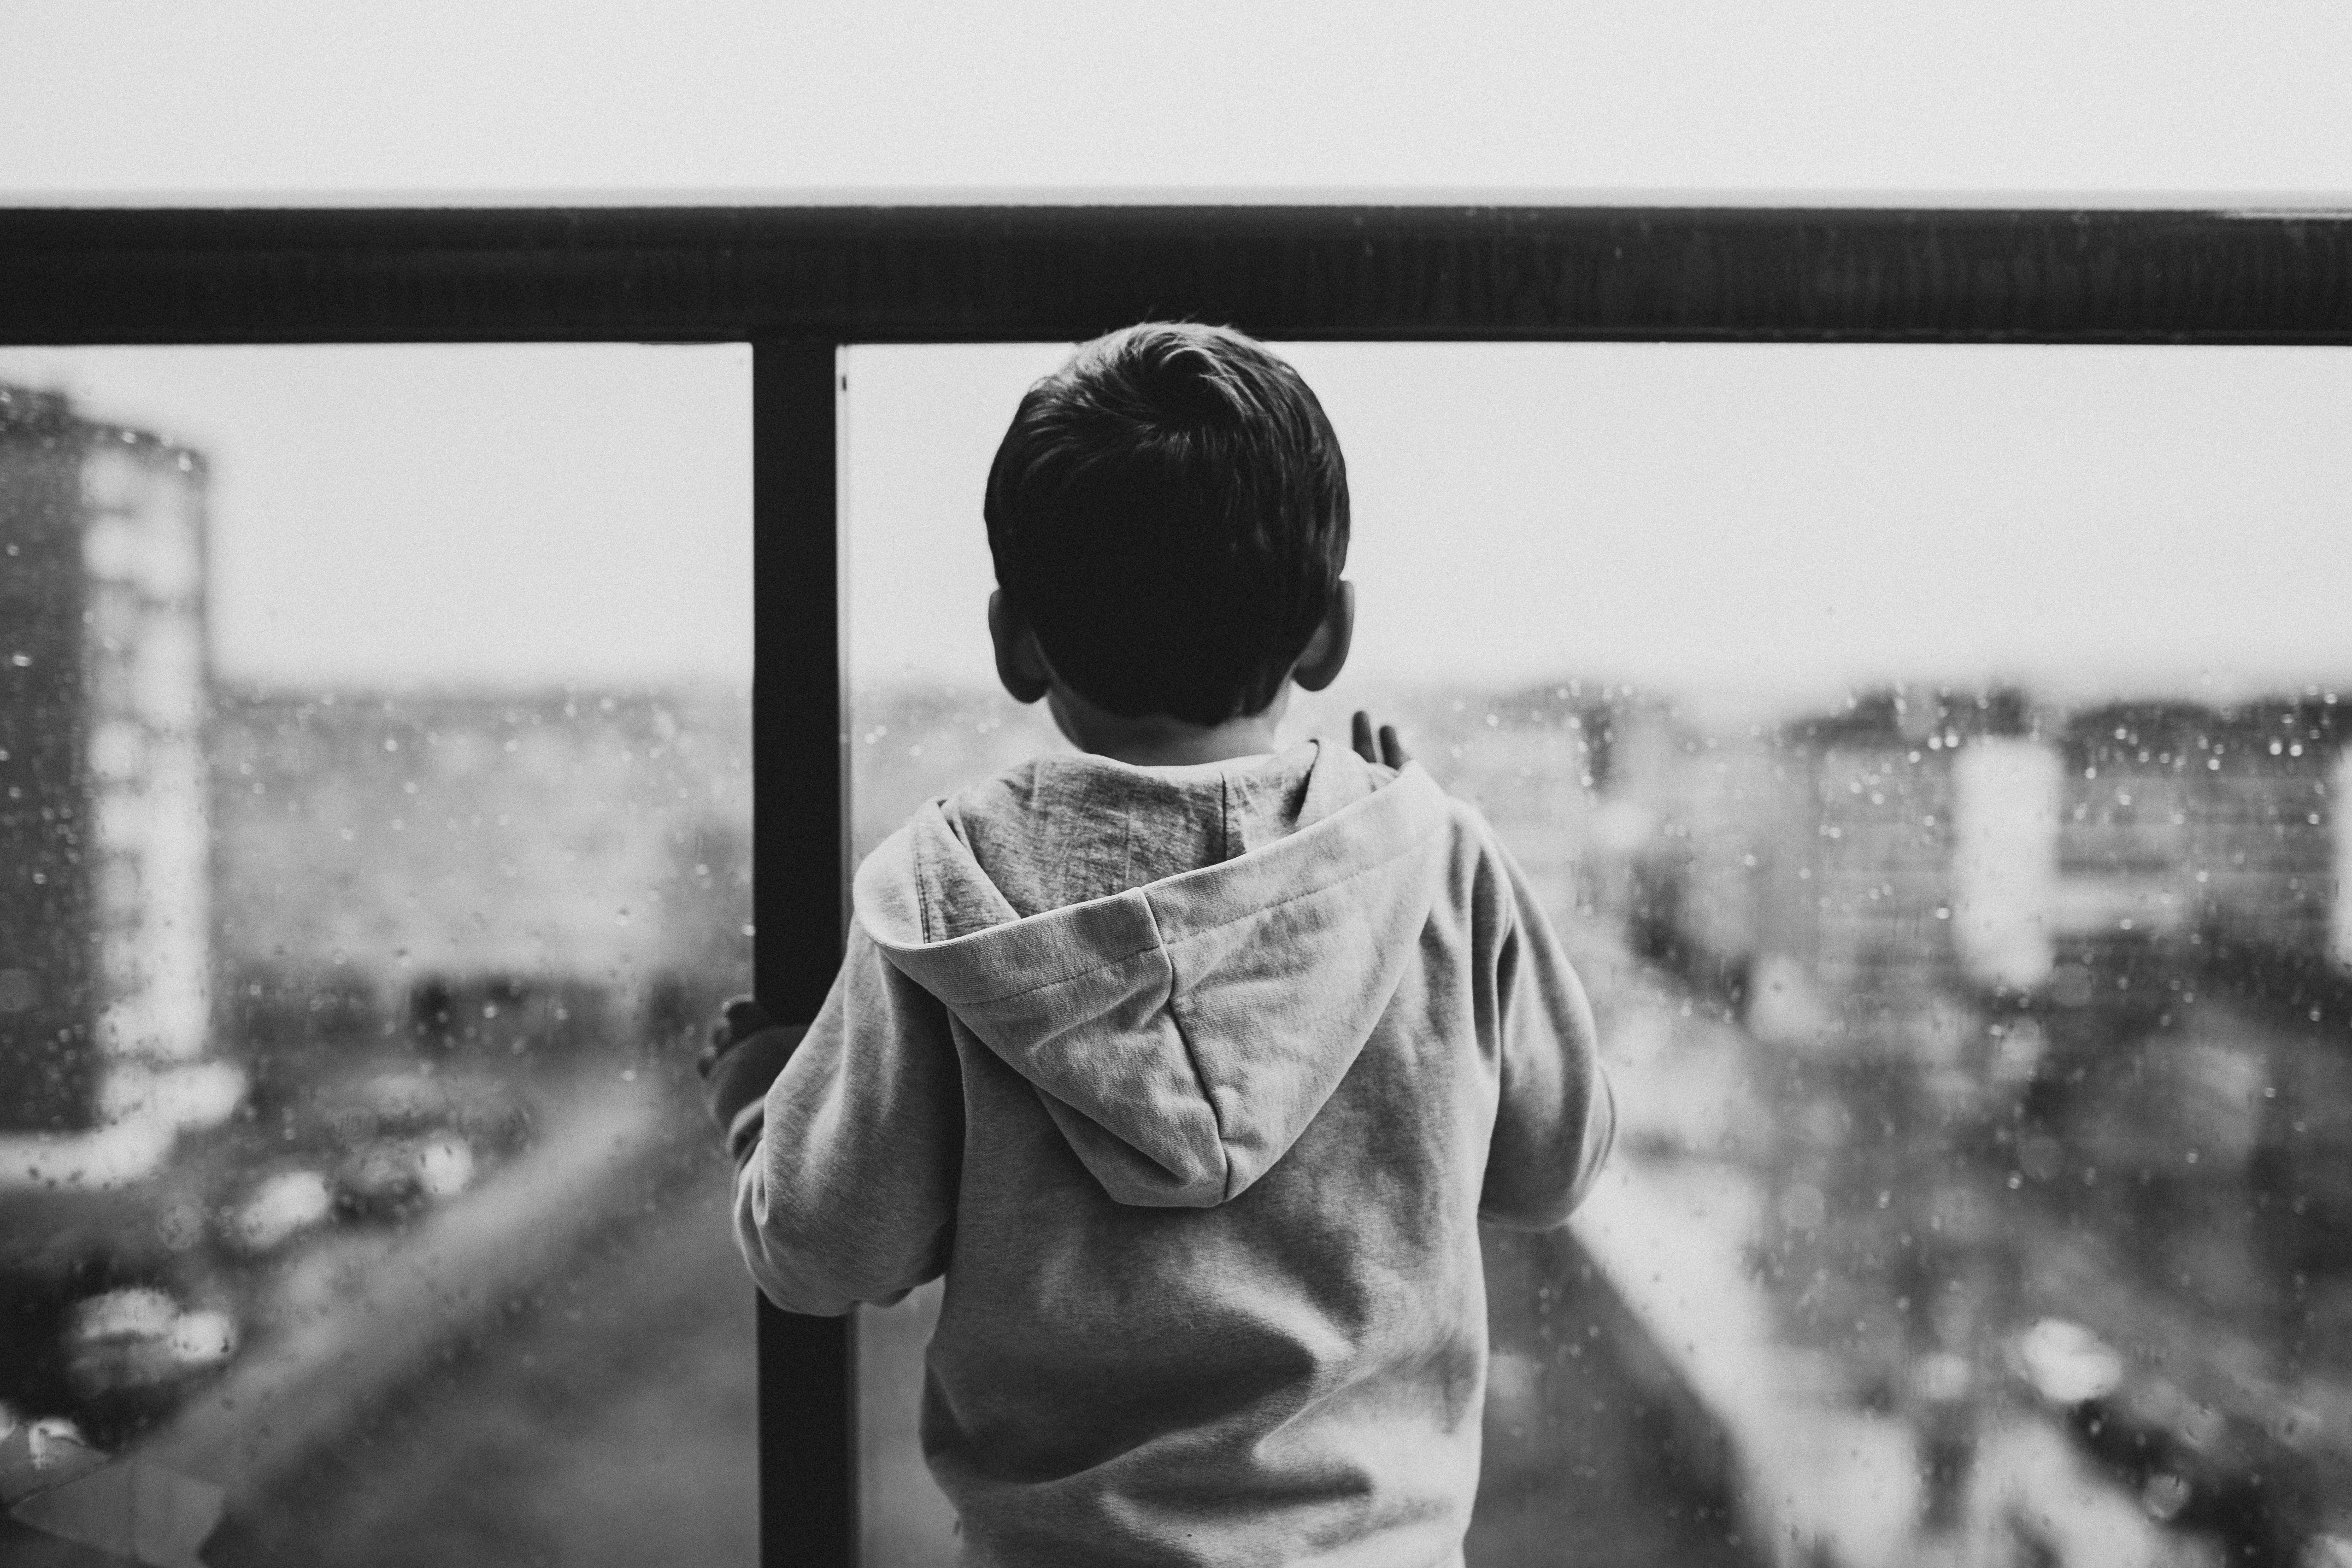 Back view of a sad child | Source: Pexels